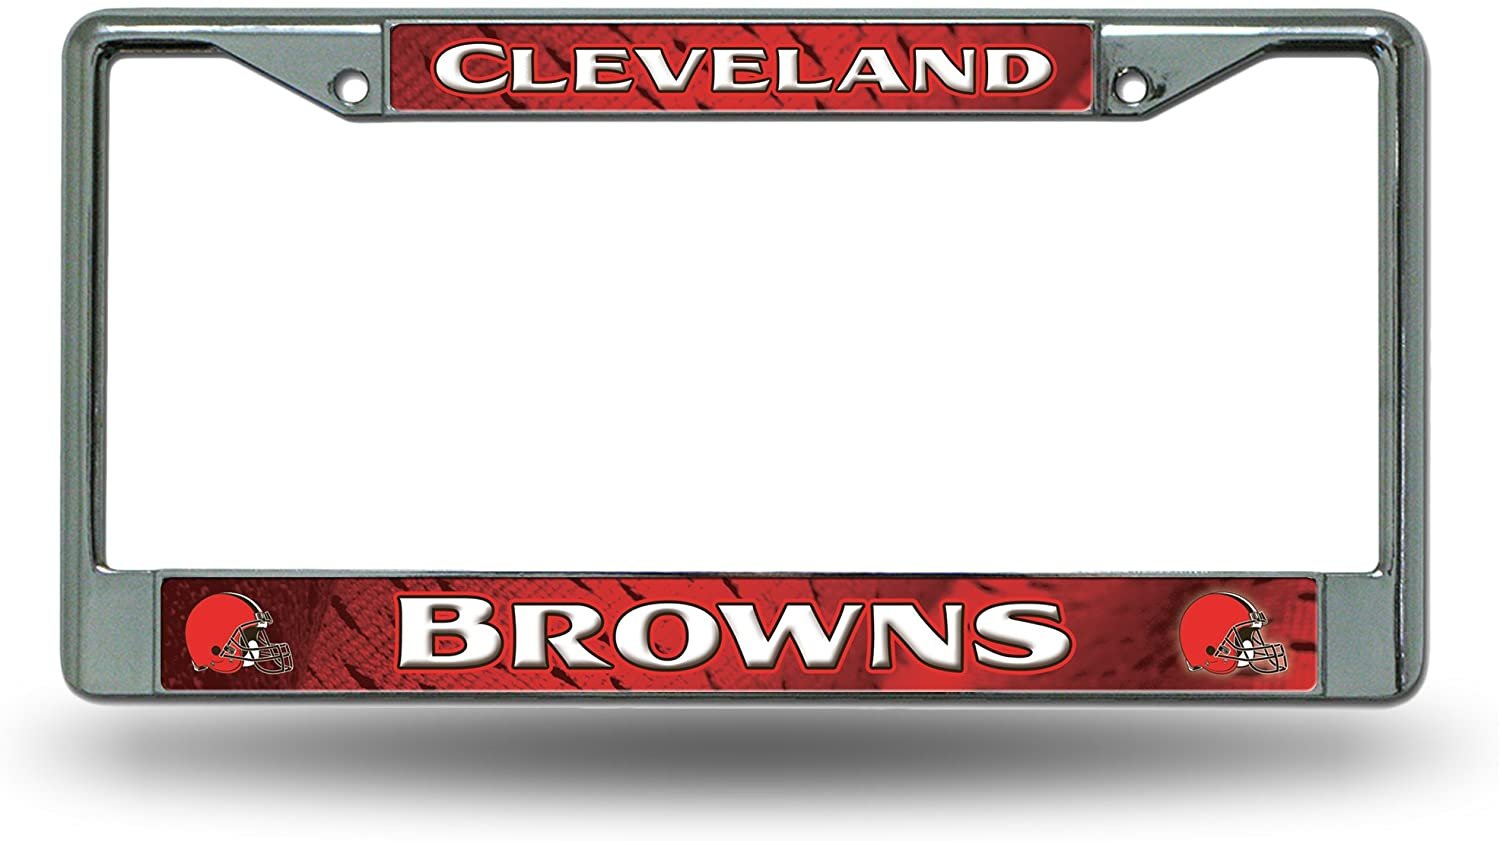 Cleveland Browns Premium Metal License Plate Frame Chrome Tag Cover, 12x6 Inch